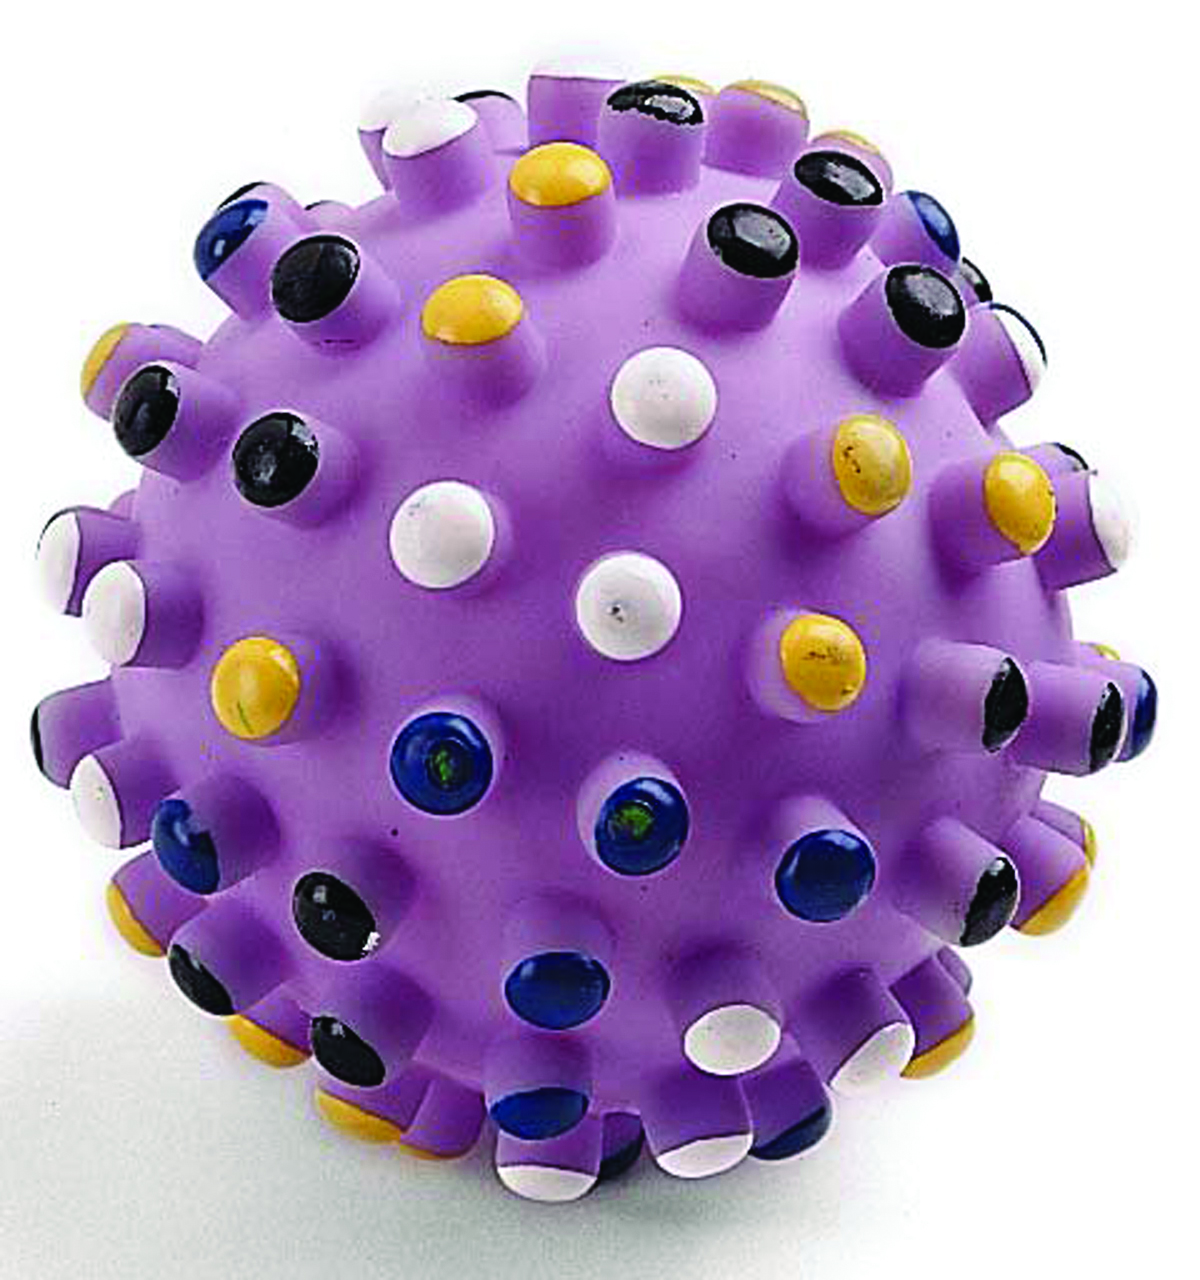 Vinyl gumdrop ball with colored tips - 5 in dog toy